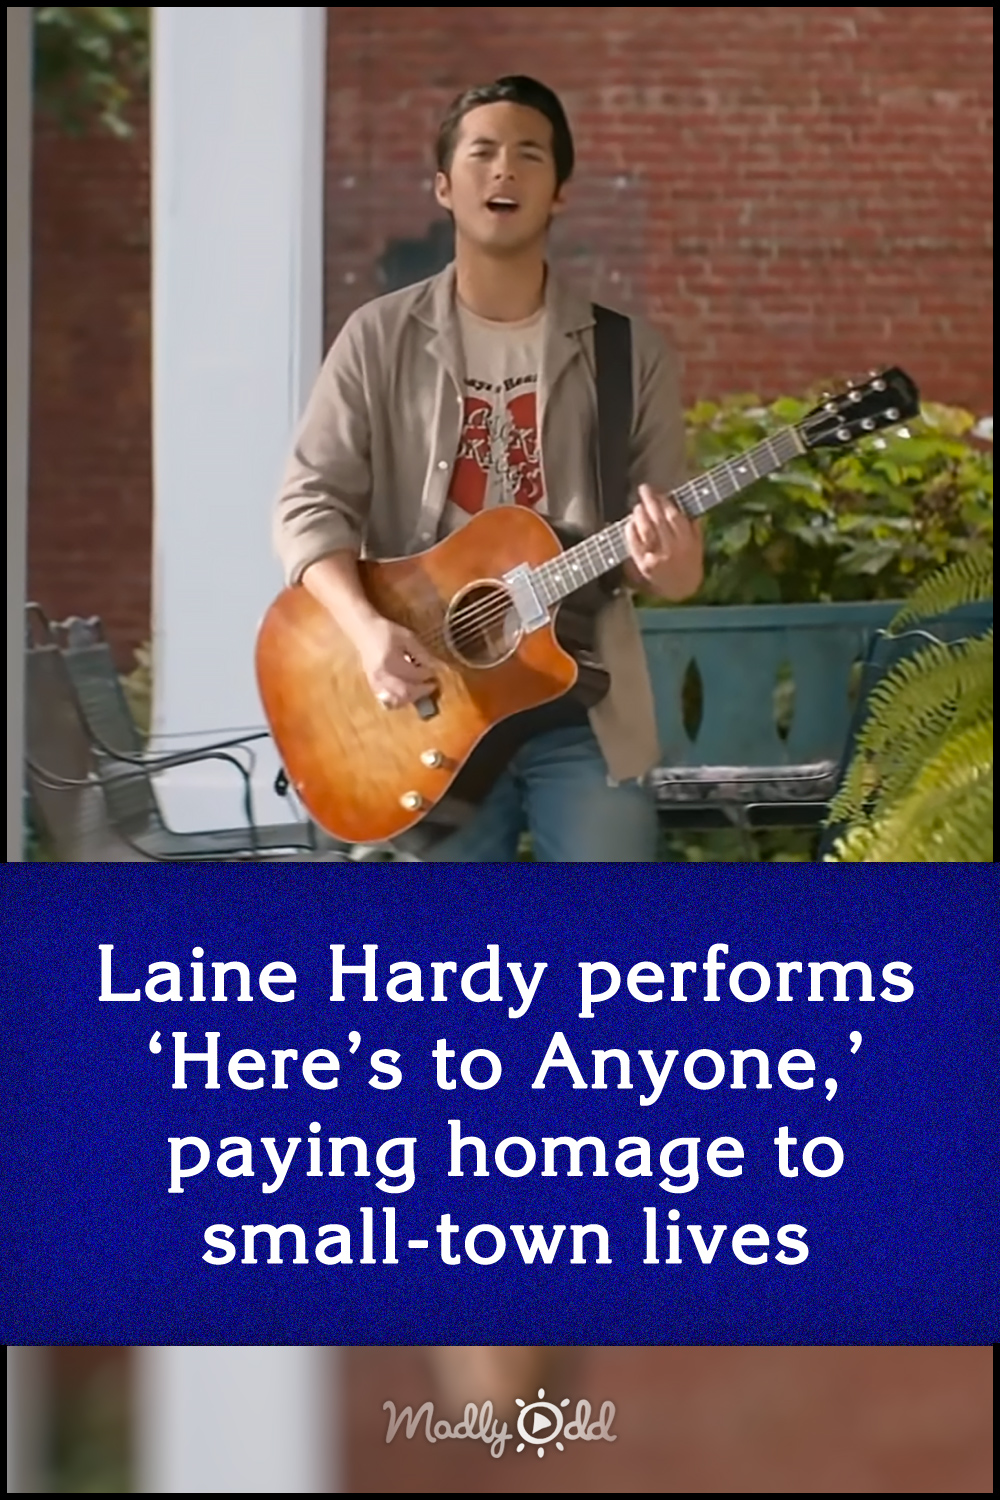 Laine Hardy performs ‘Here’s to Anyone,’ paying homage to small-town lives